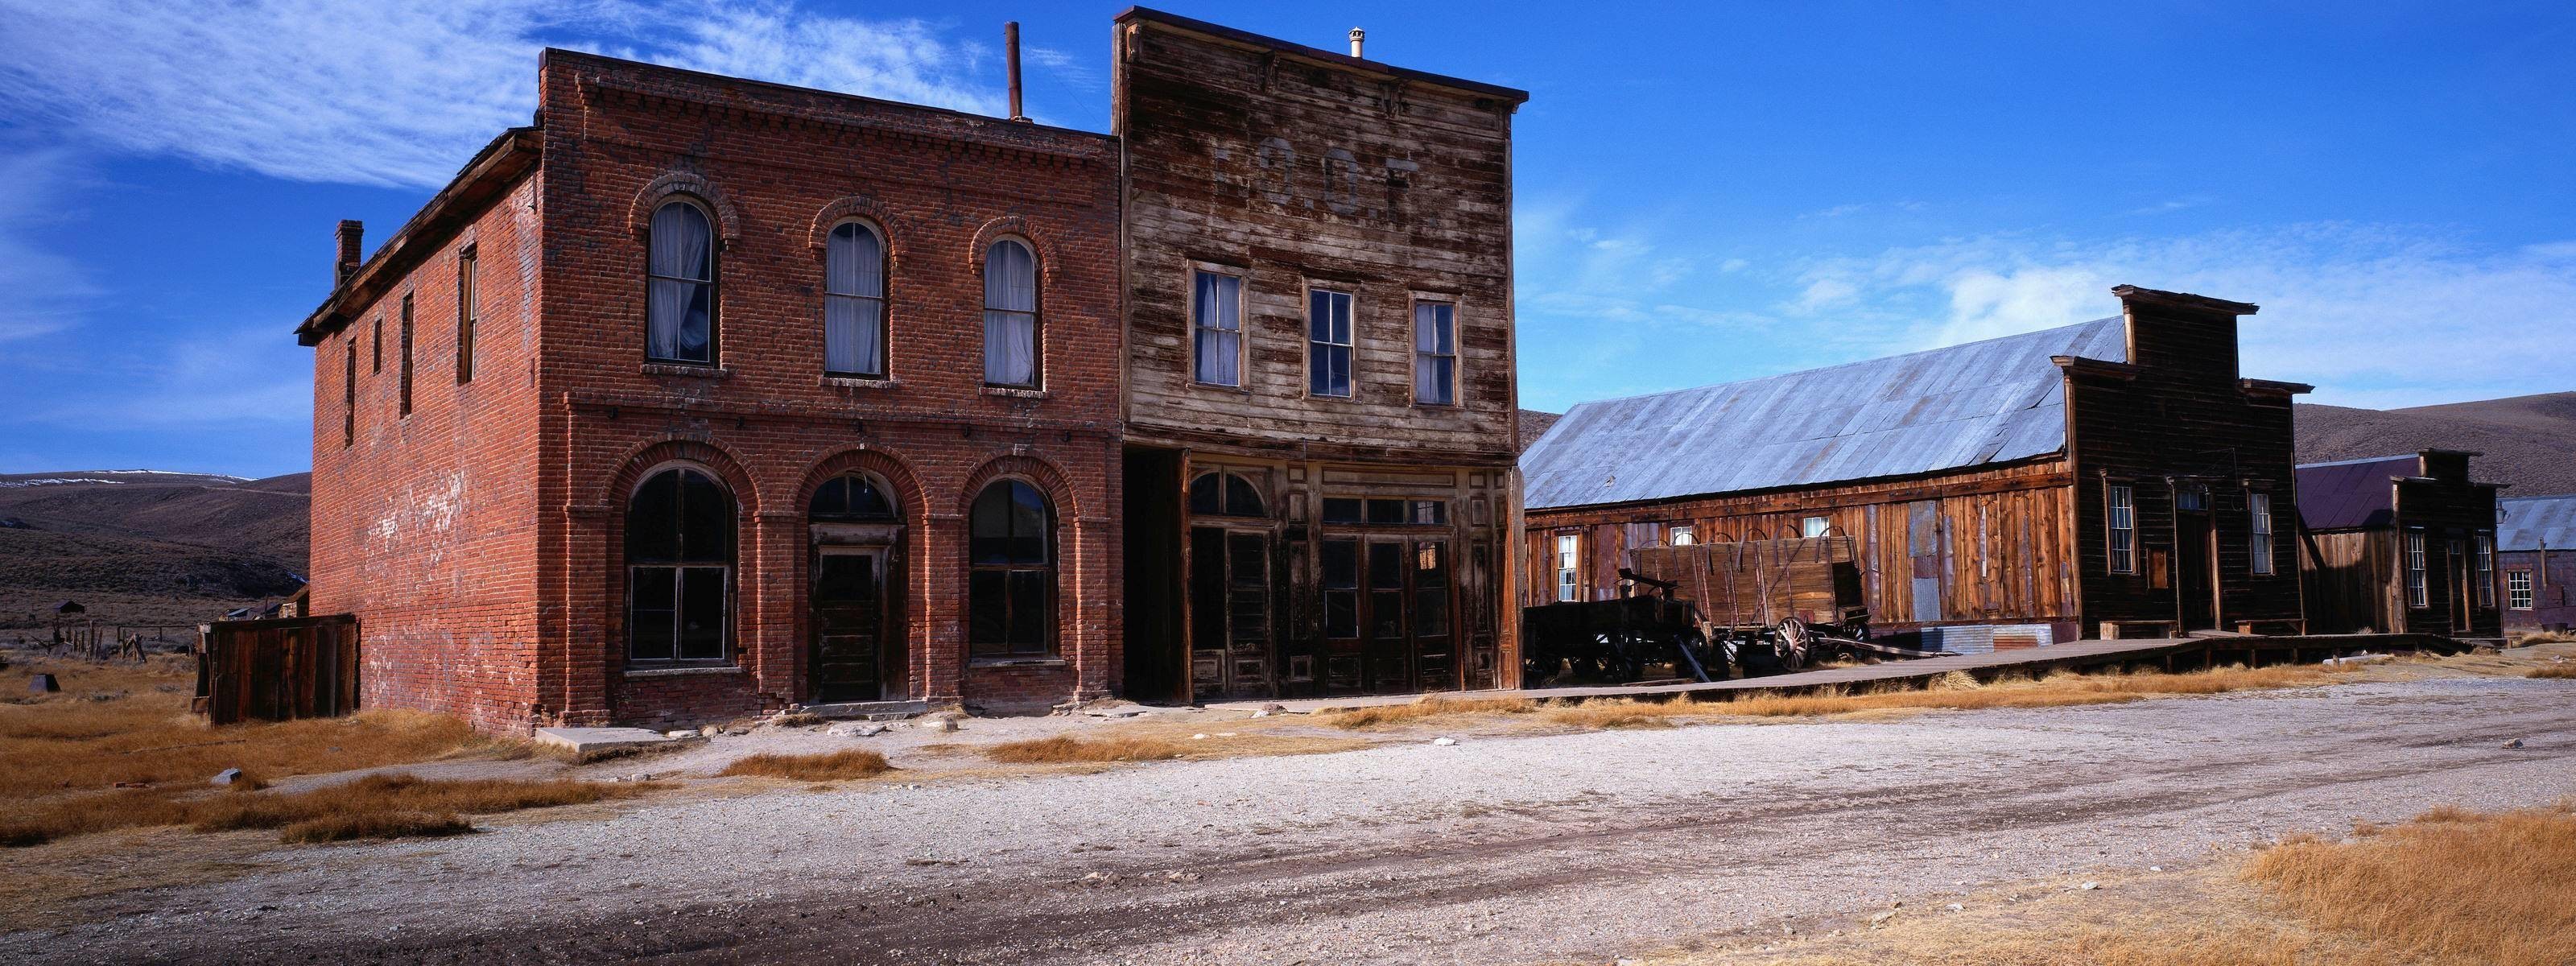 3200x1200 Wallpapers For > Wild West Town Wallpaper